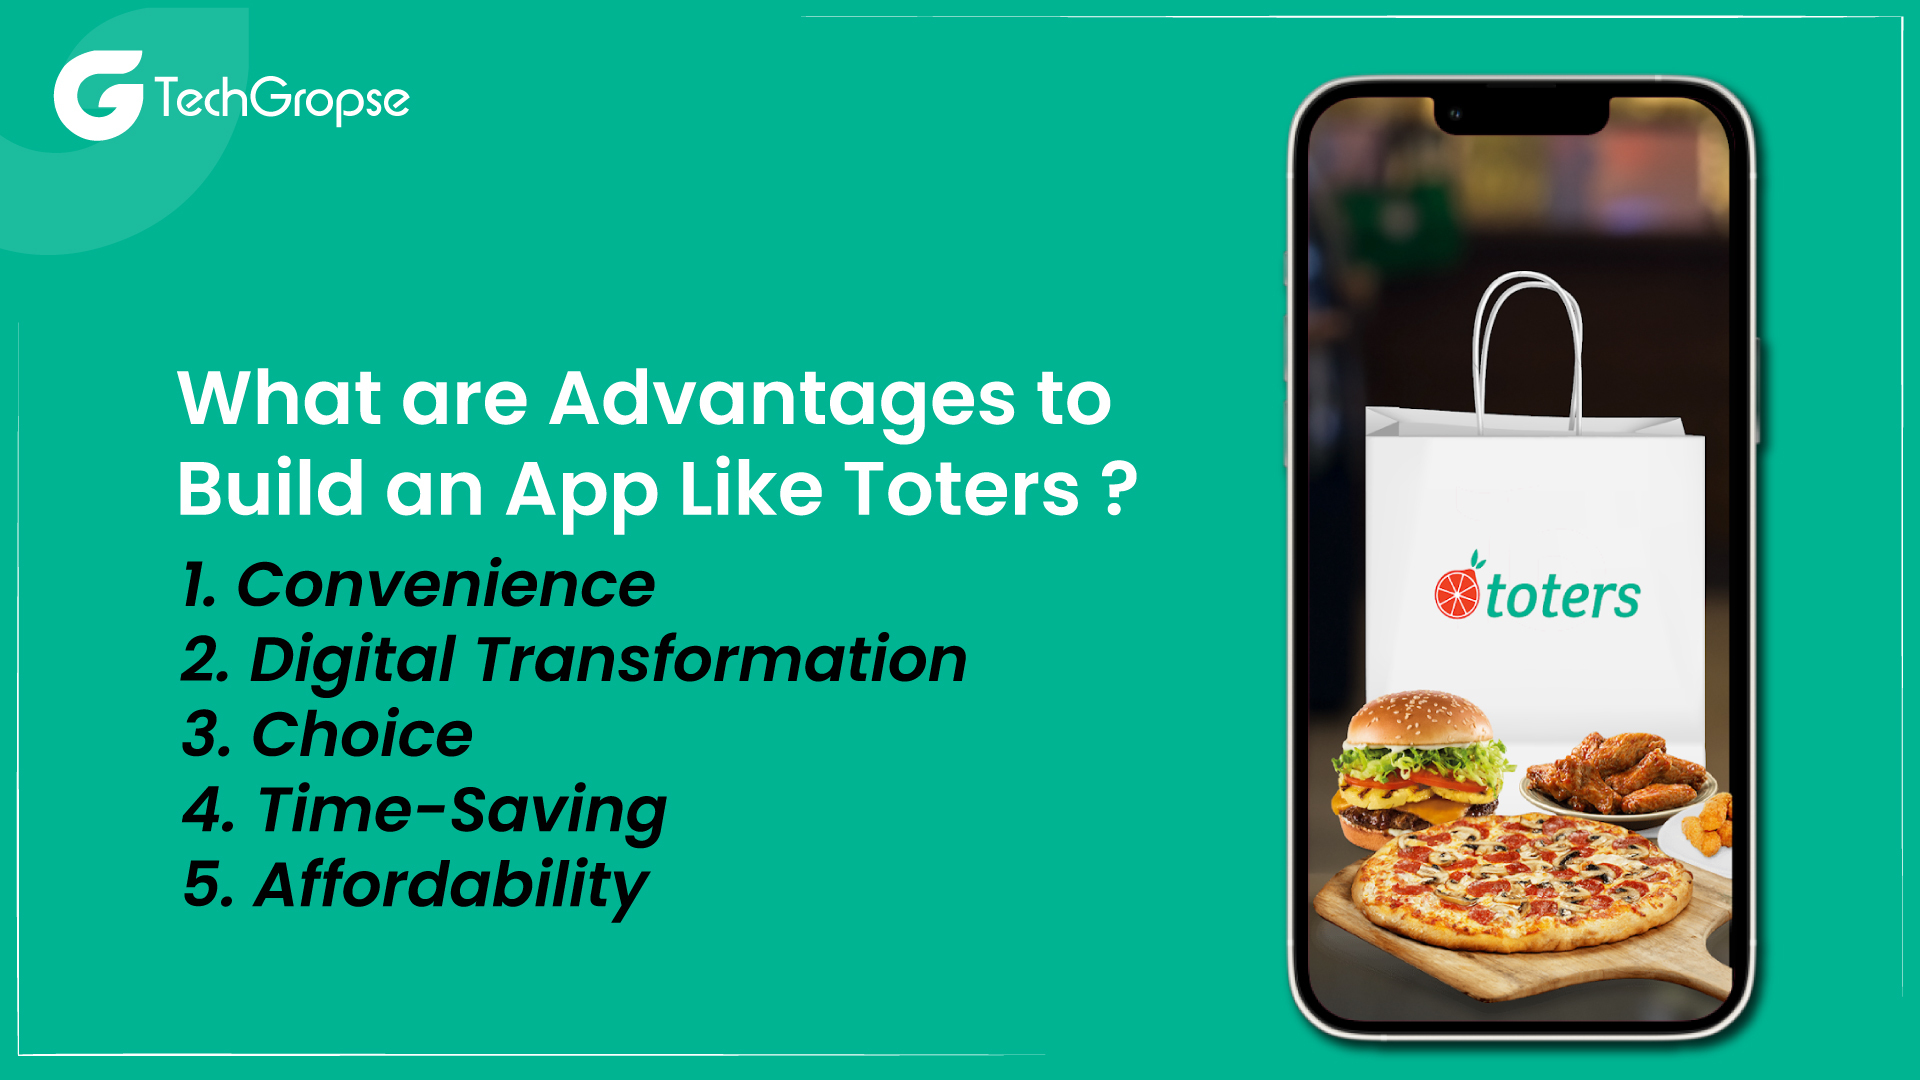 What are Advantages to Build an App Like Toters